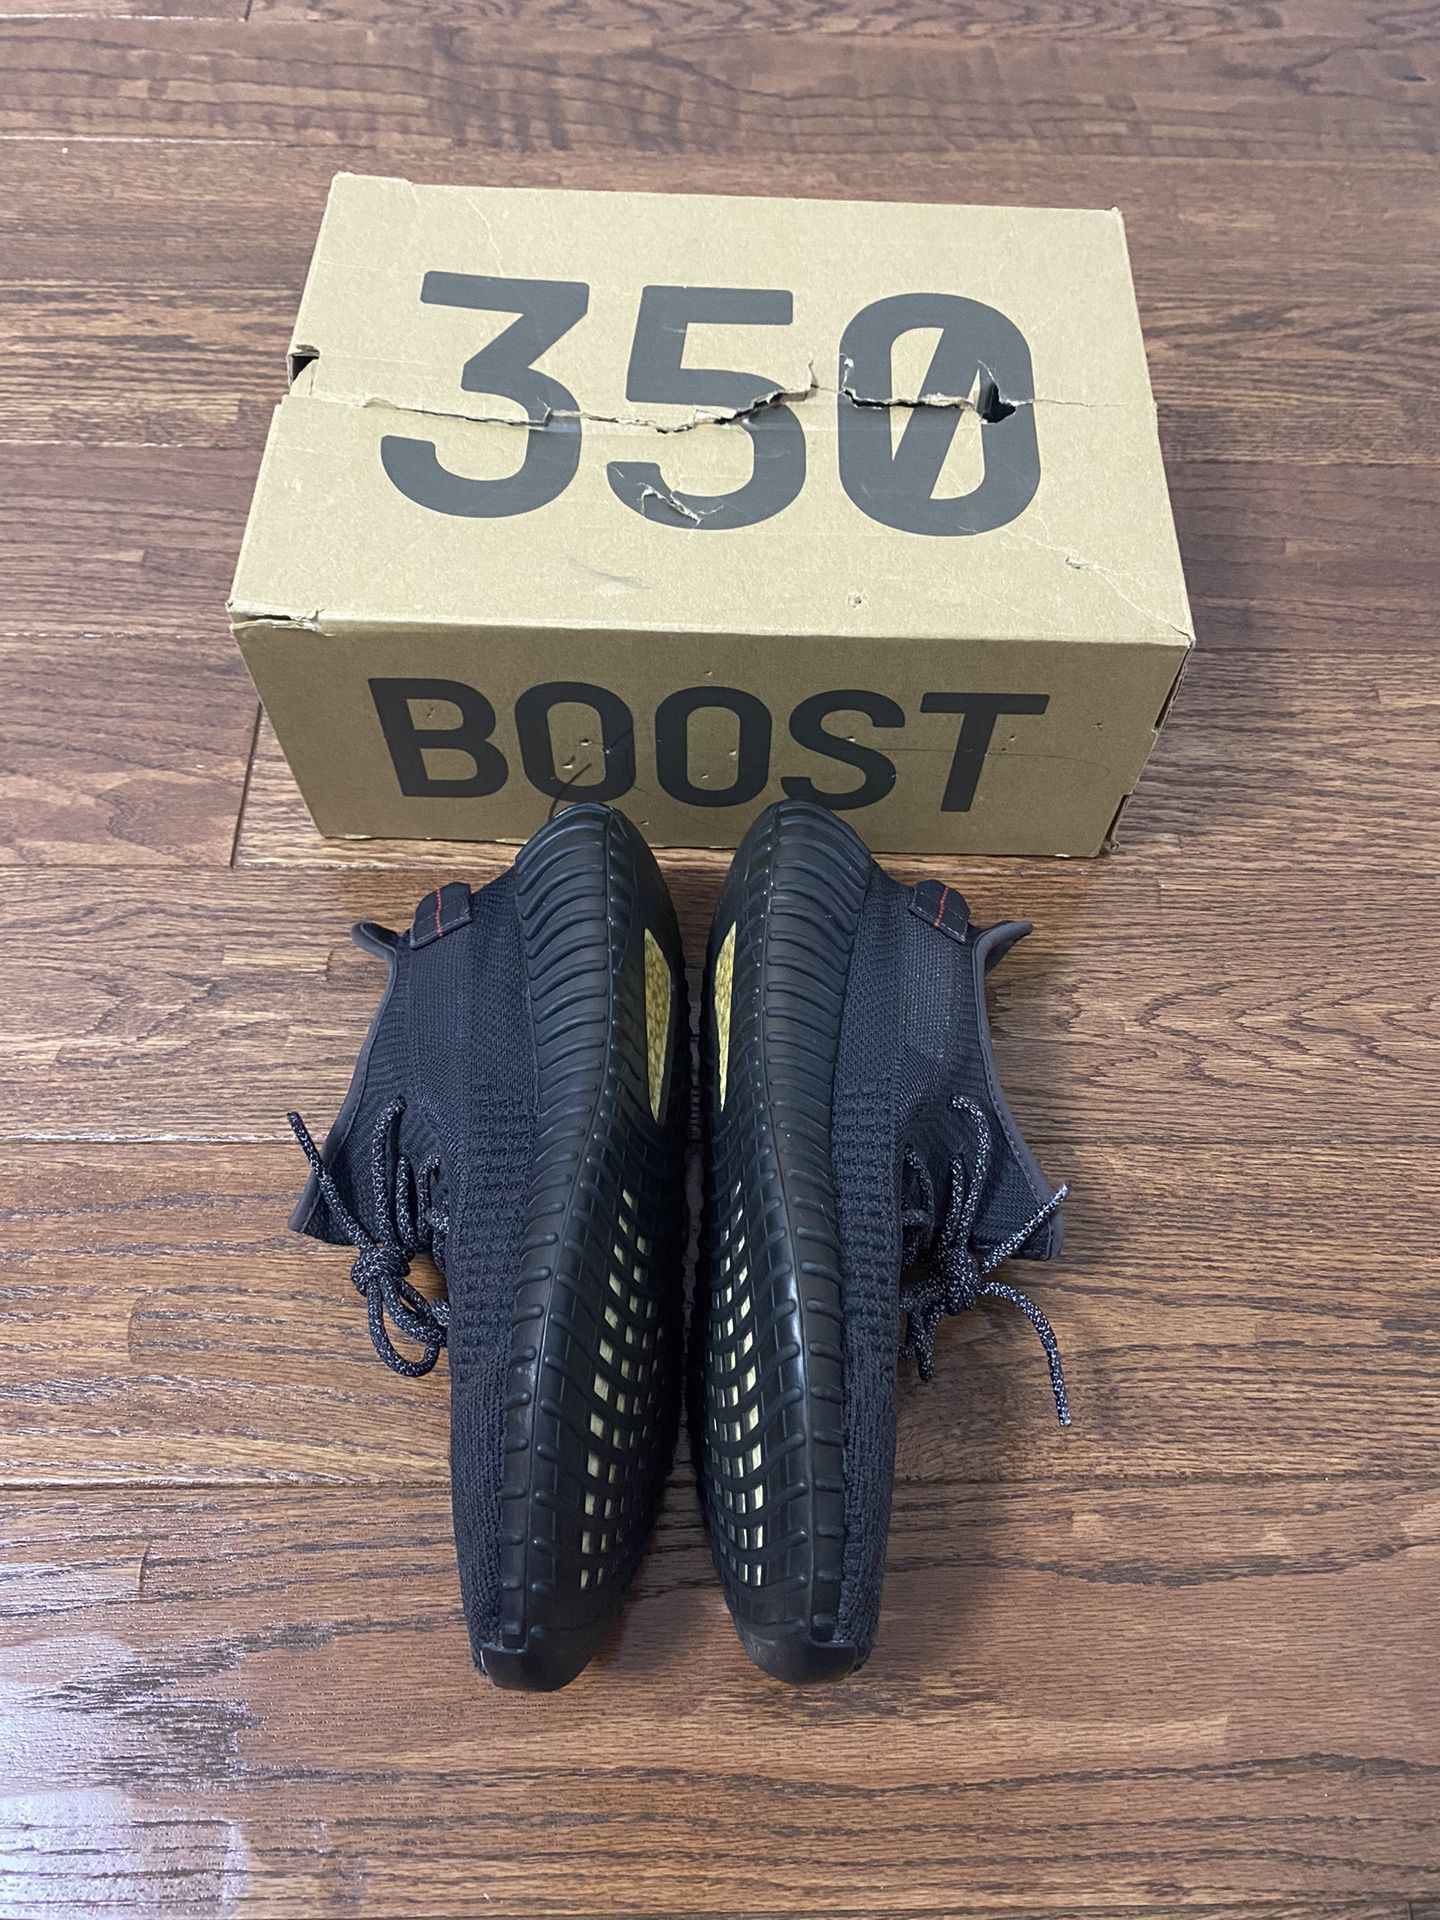 Yeezy Boost 350 V2 Black (Non-Reflective) used w damaged og box for Sale in Brooklyn, NY - OfferUp